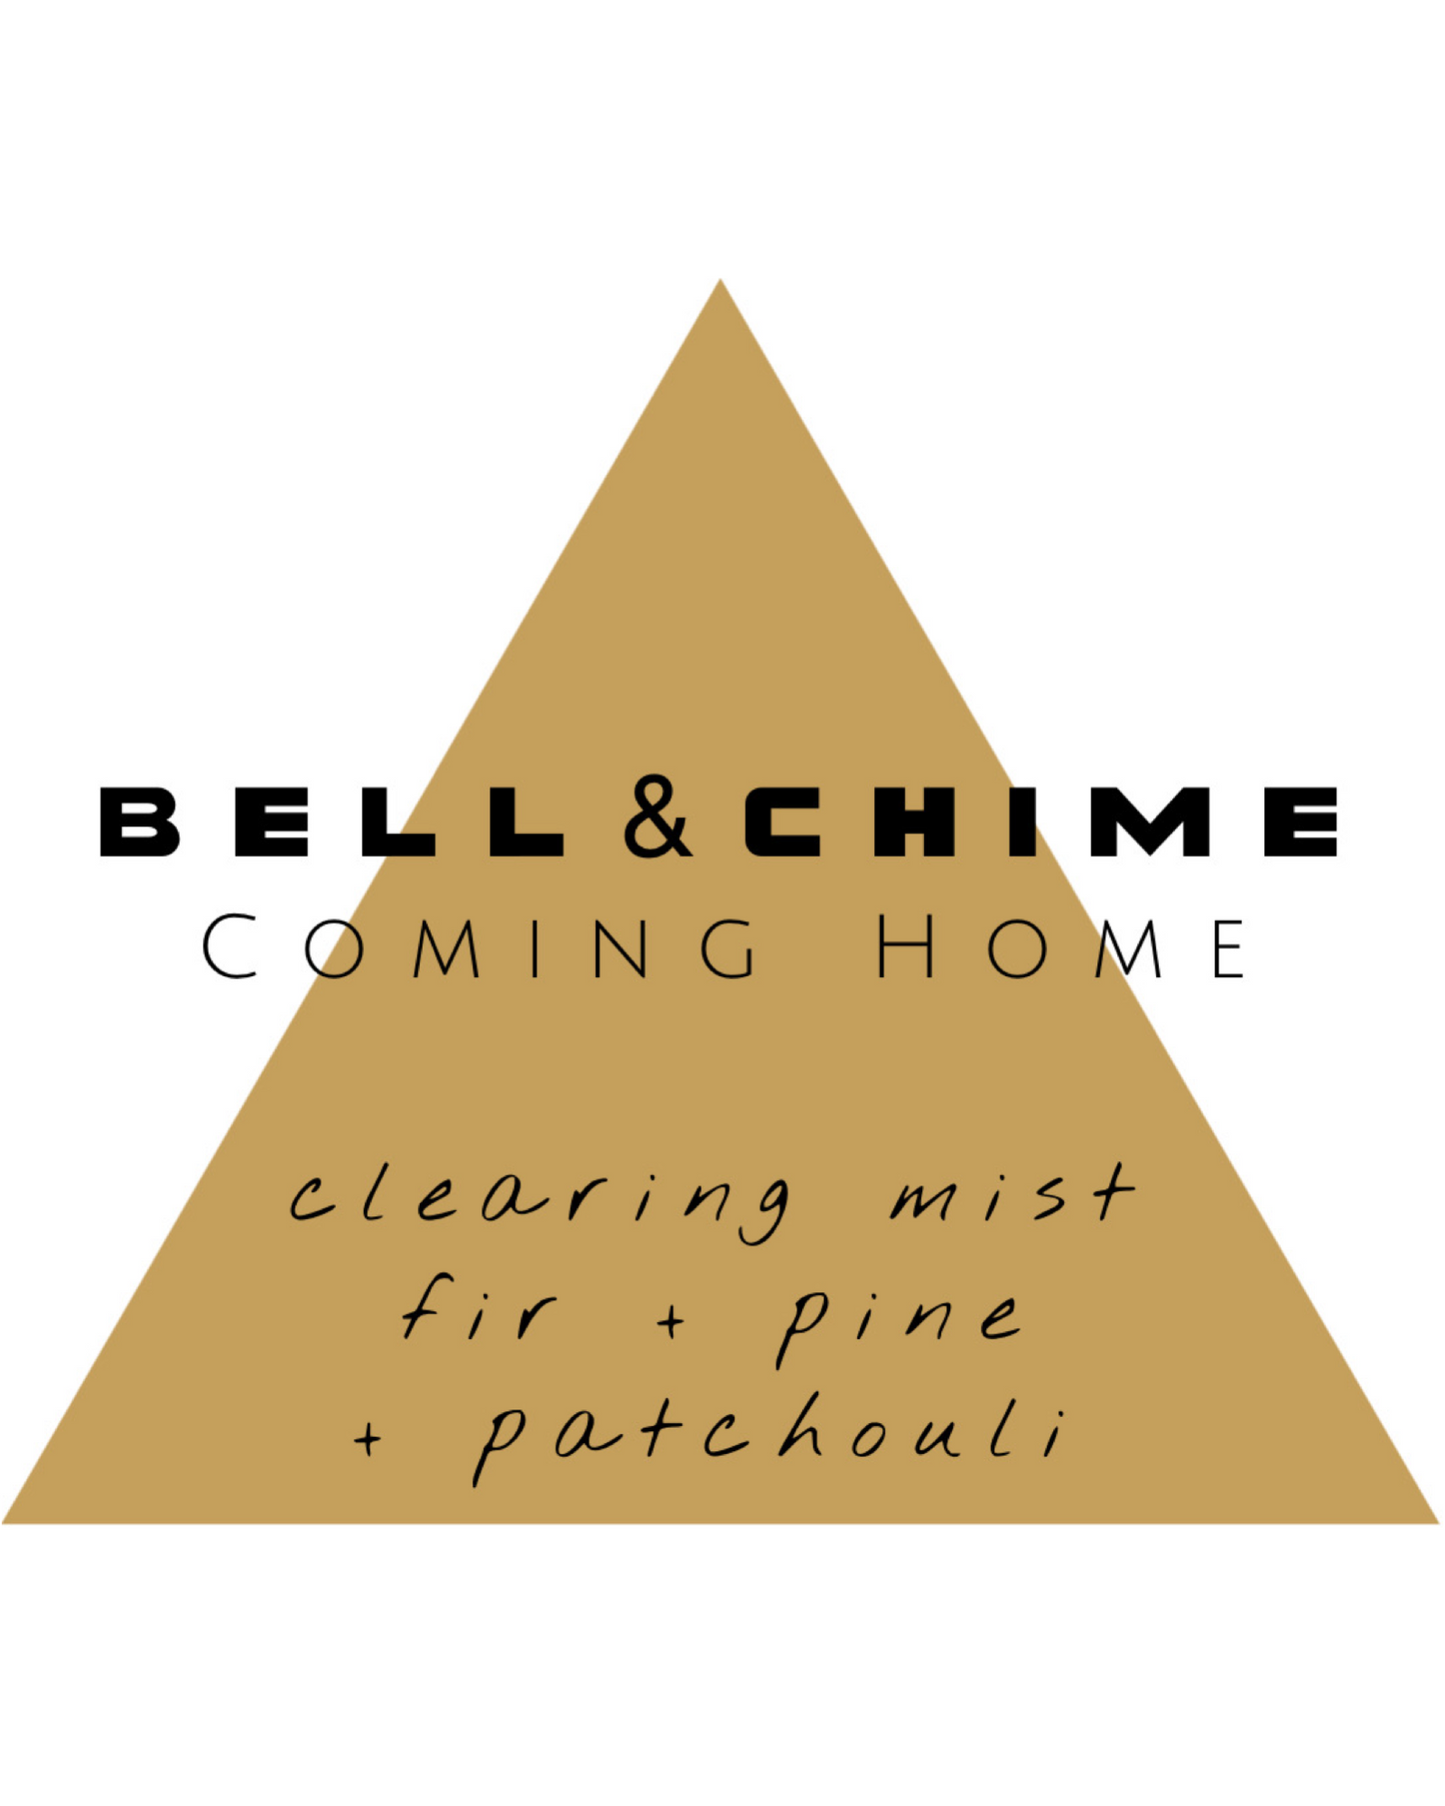 Bell & Chime: "Coming Home" Clearing Mist Fir + Pine + Patchouli